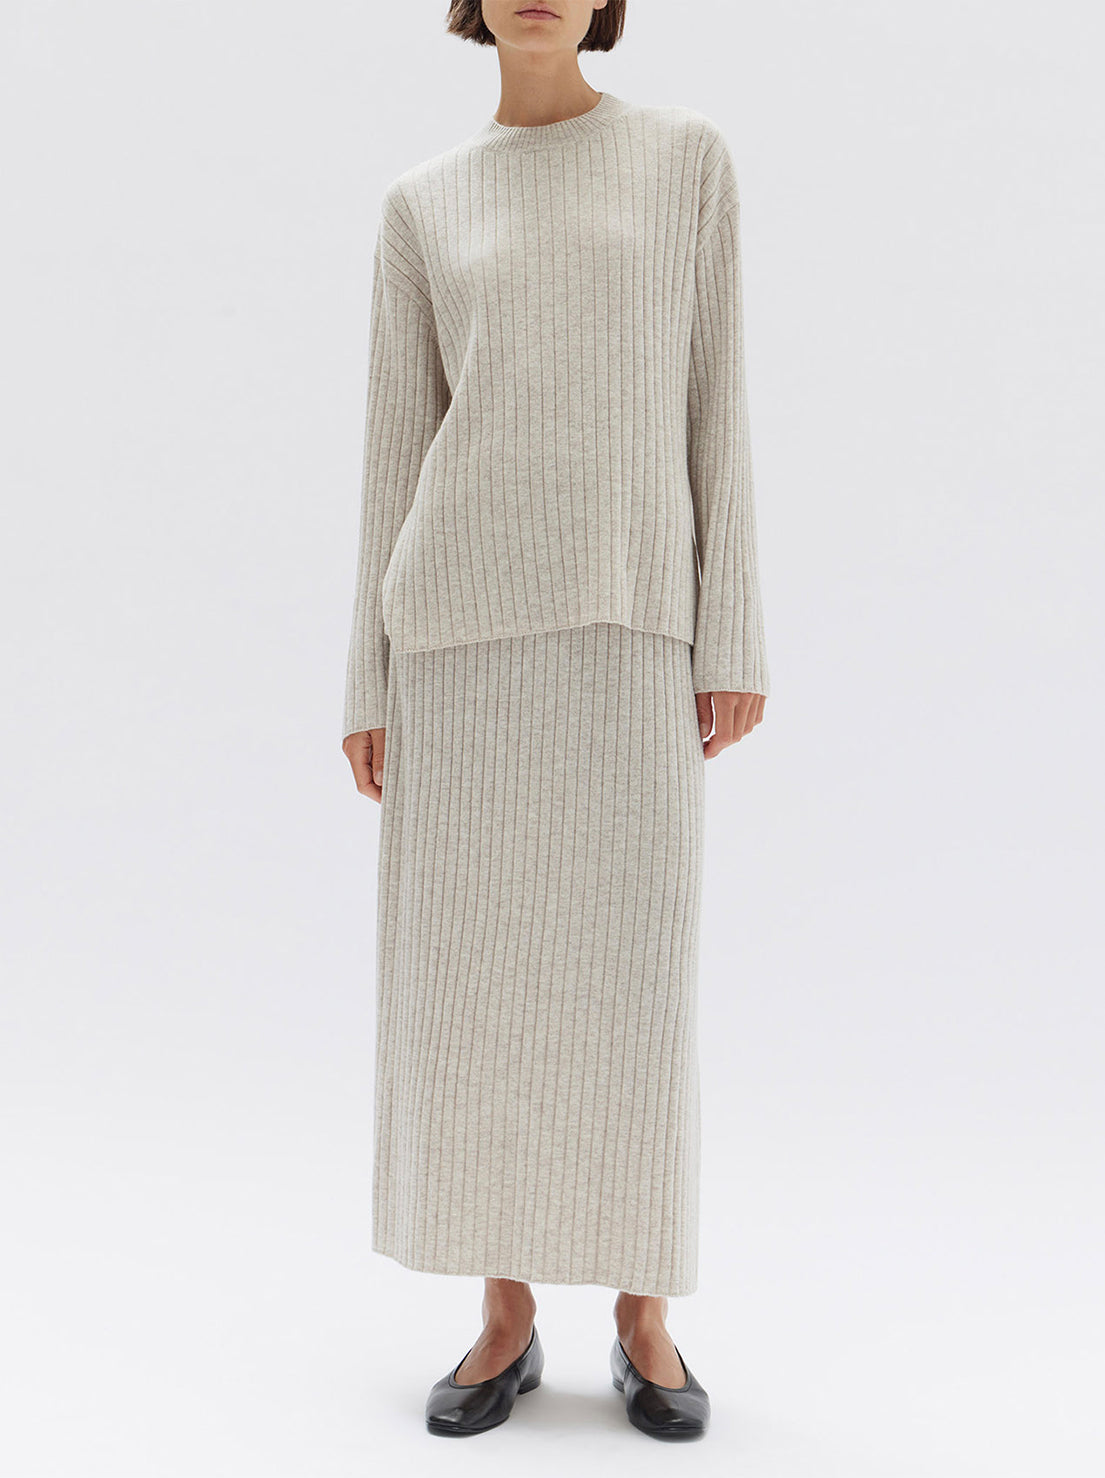 Assembly - Wool Cashmere Rib Skirt - Oat Marle